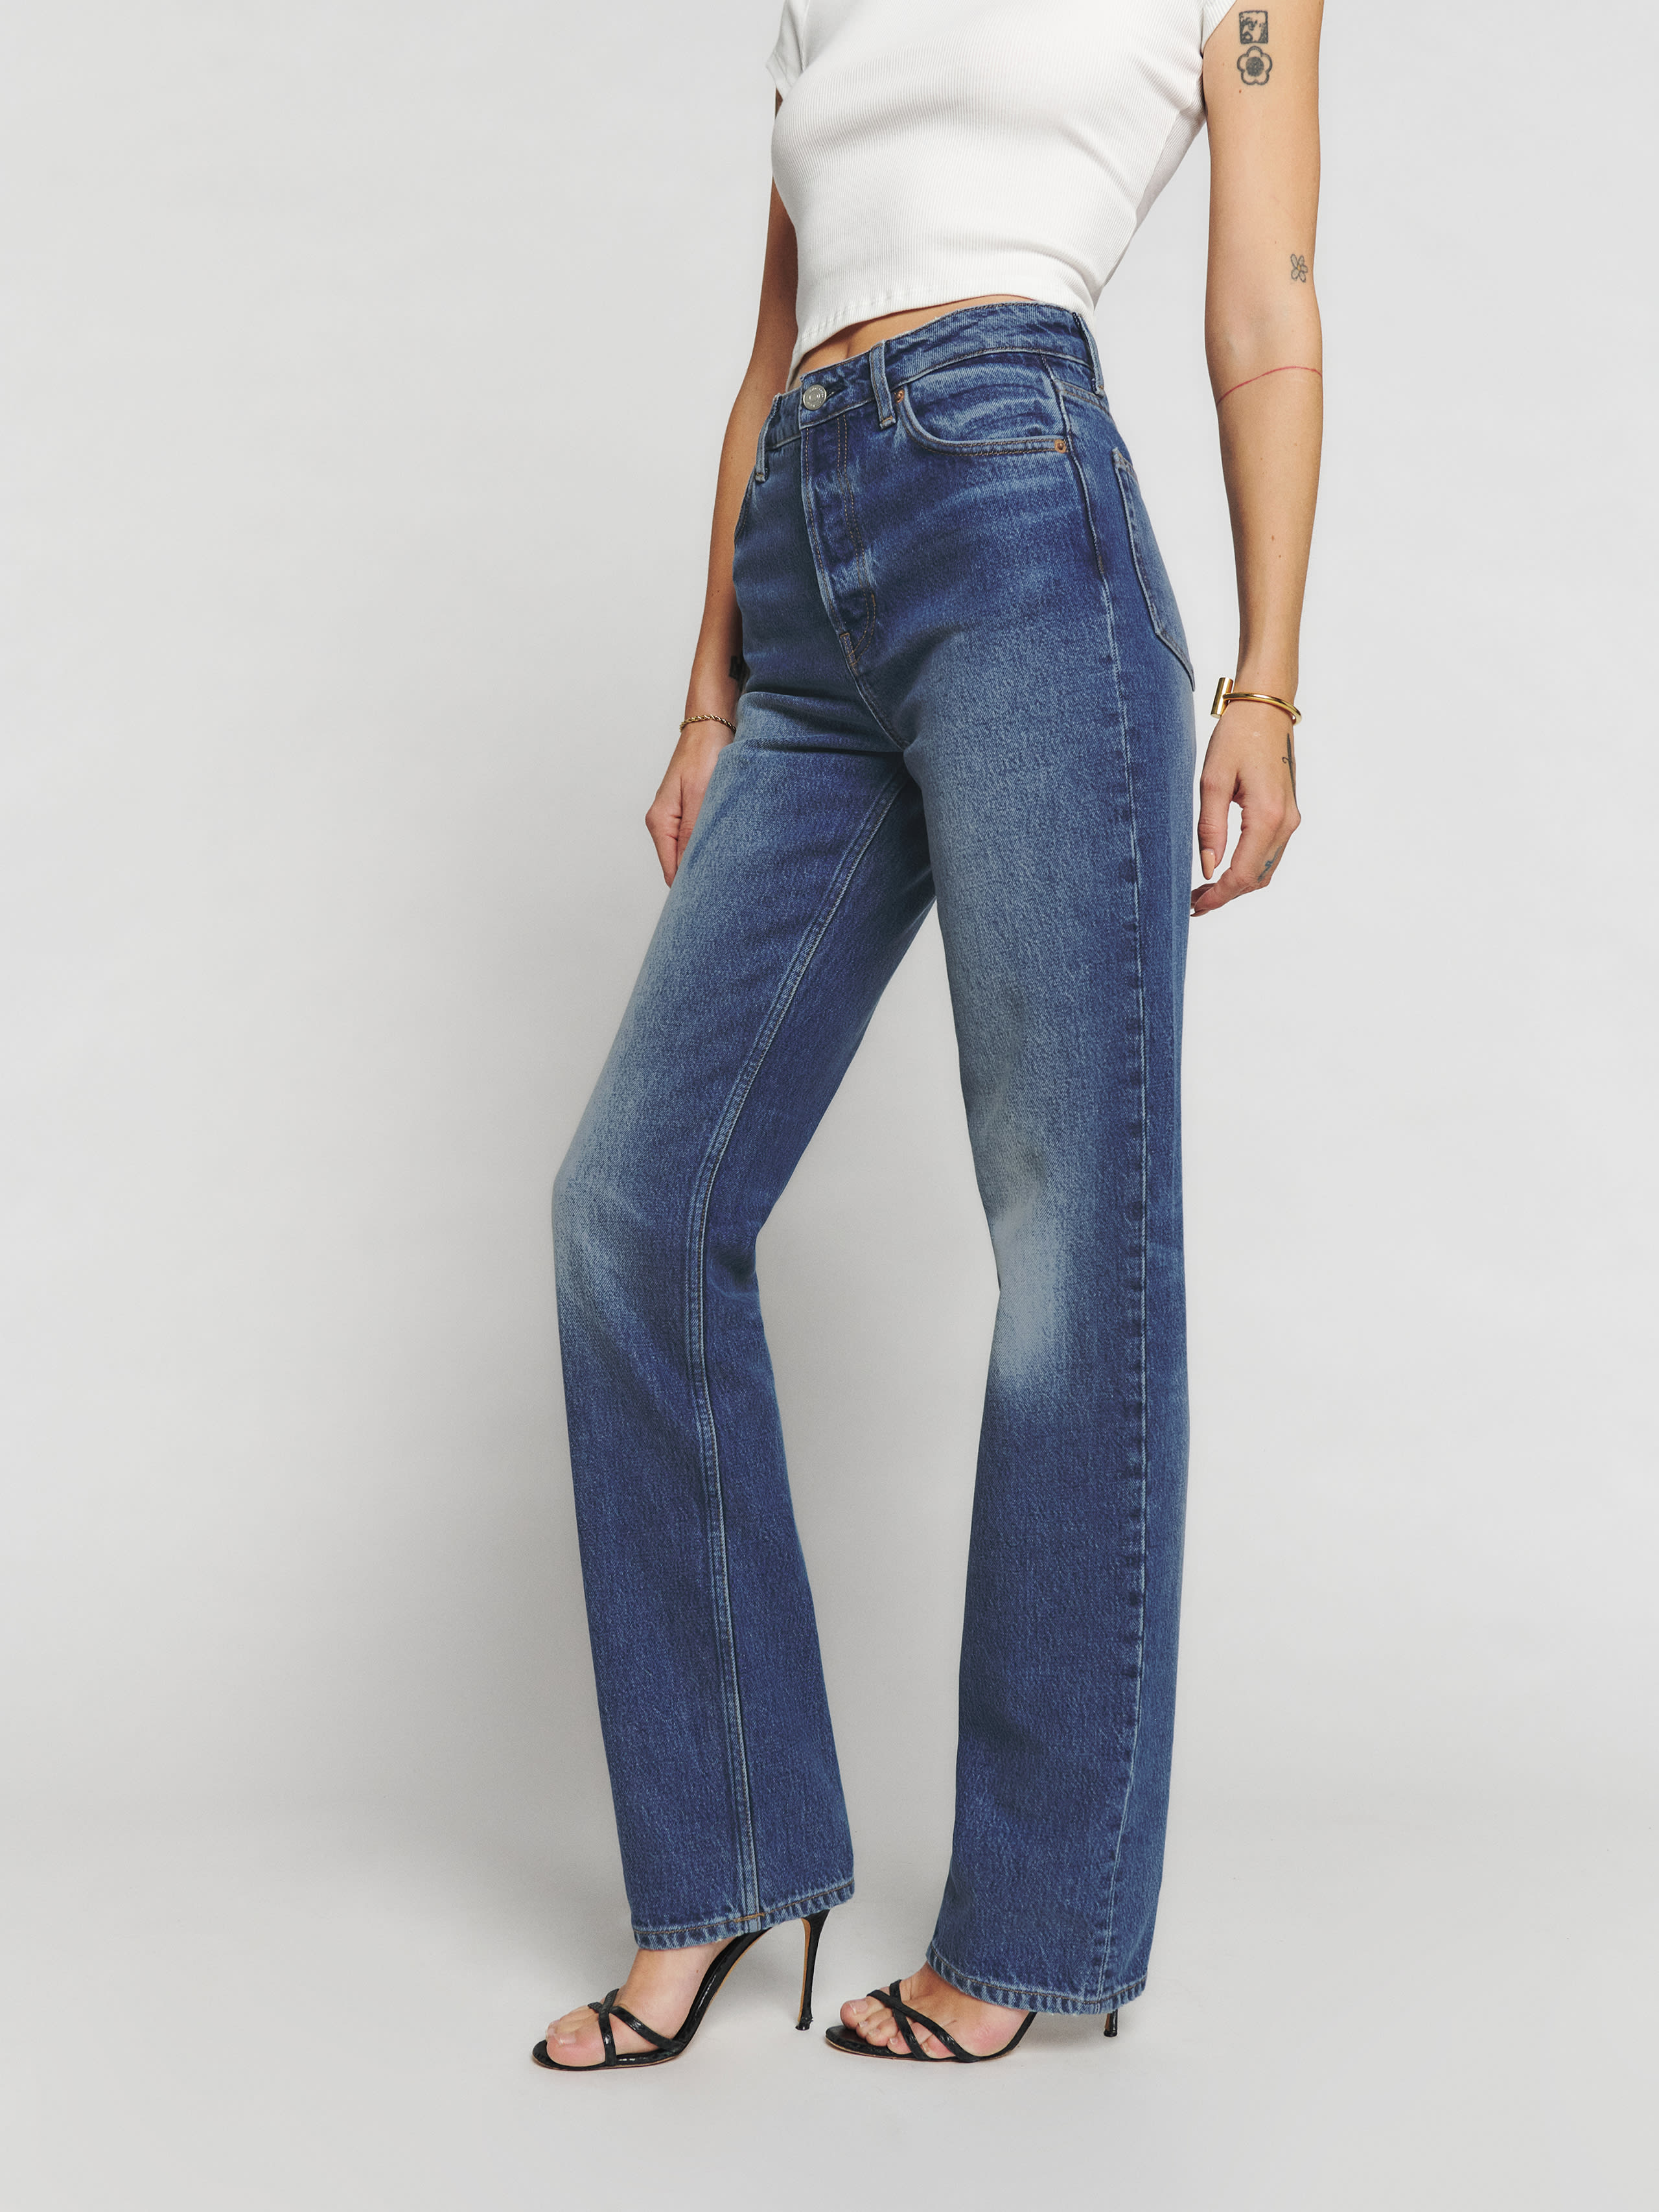 Reformation Cynthia High Rise Straight Long Jeans In Hemlock